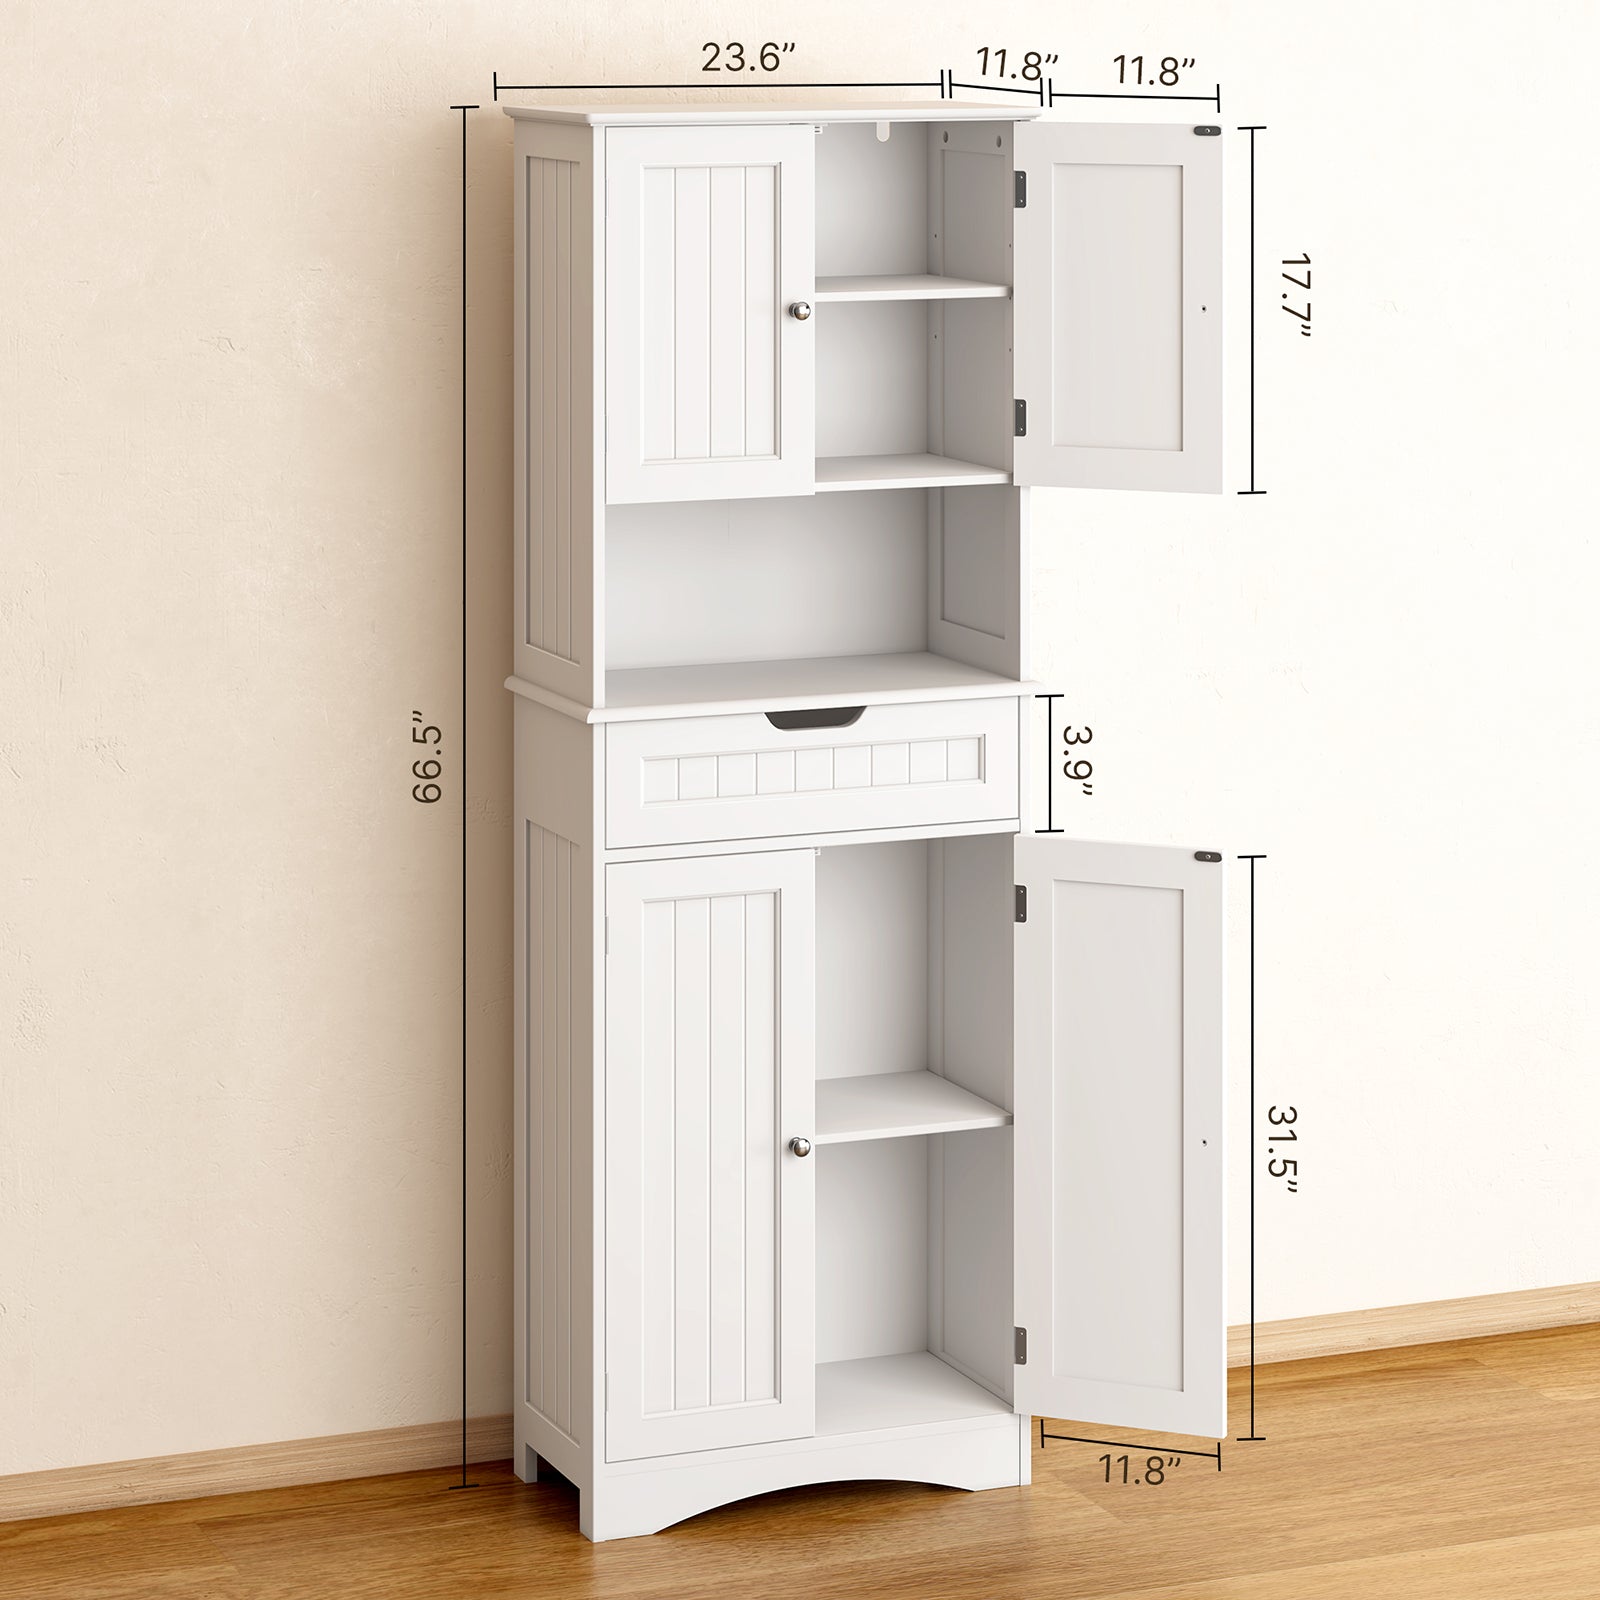 Gizoon AP14 66" Storage Cabinet with Drawers and Shelves for Dining Room and Bathroom